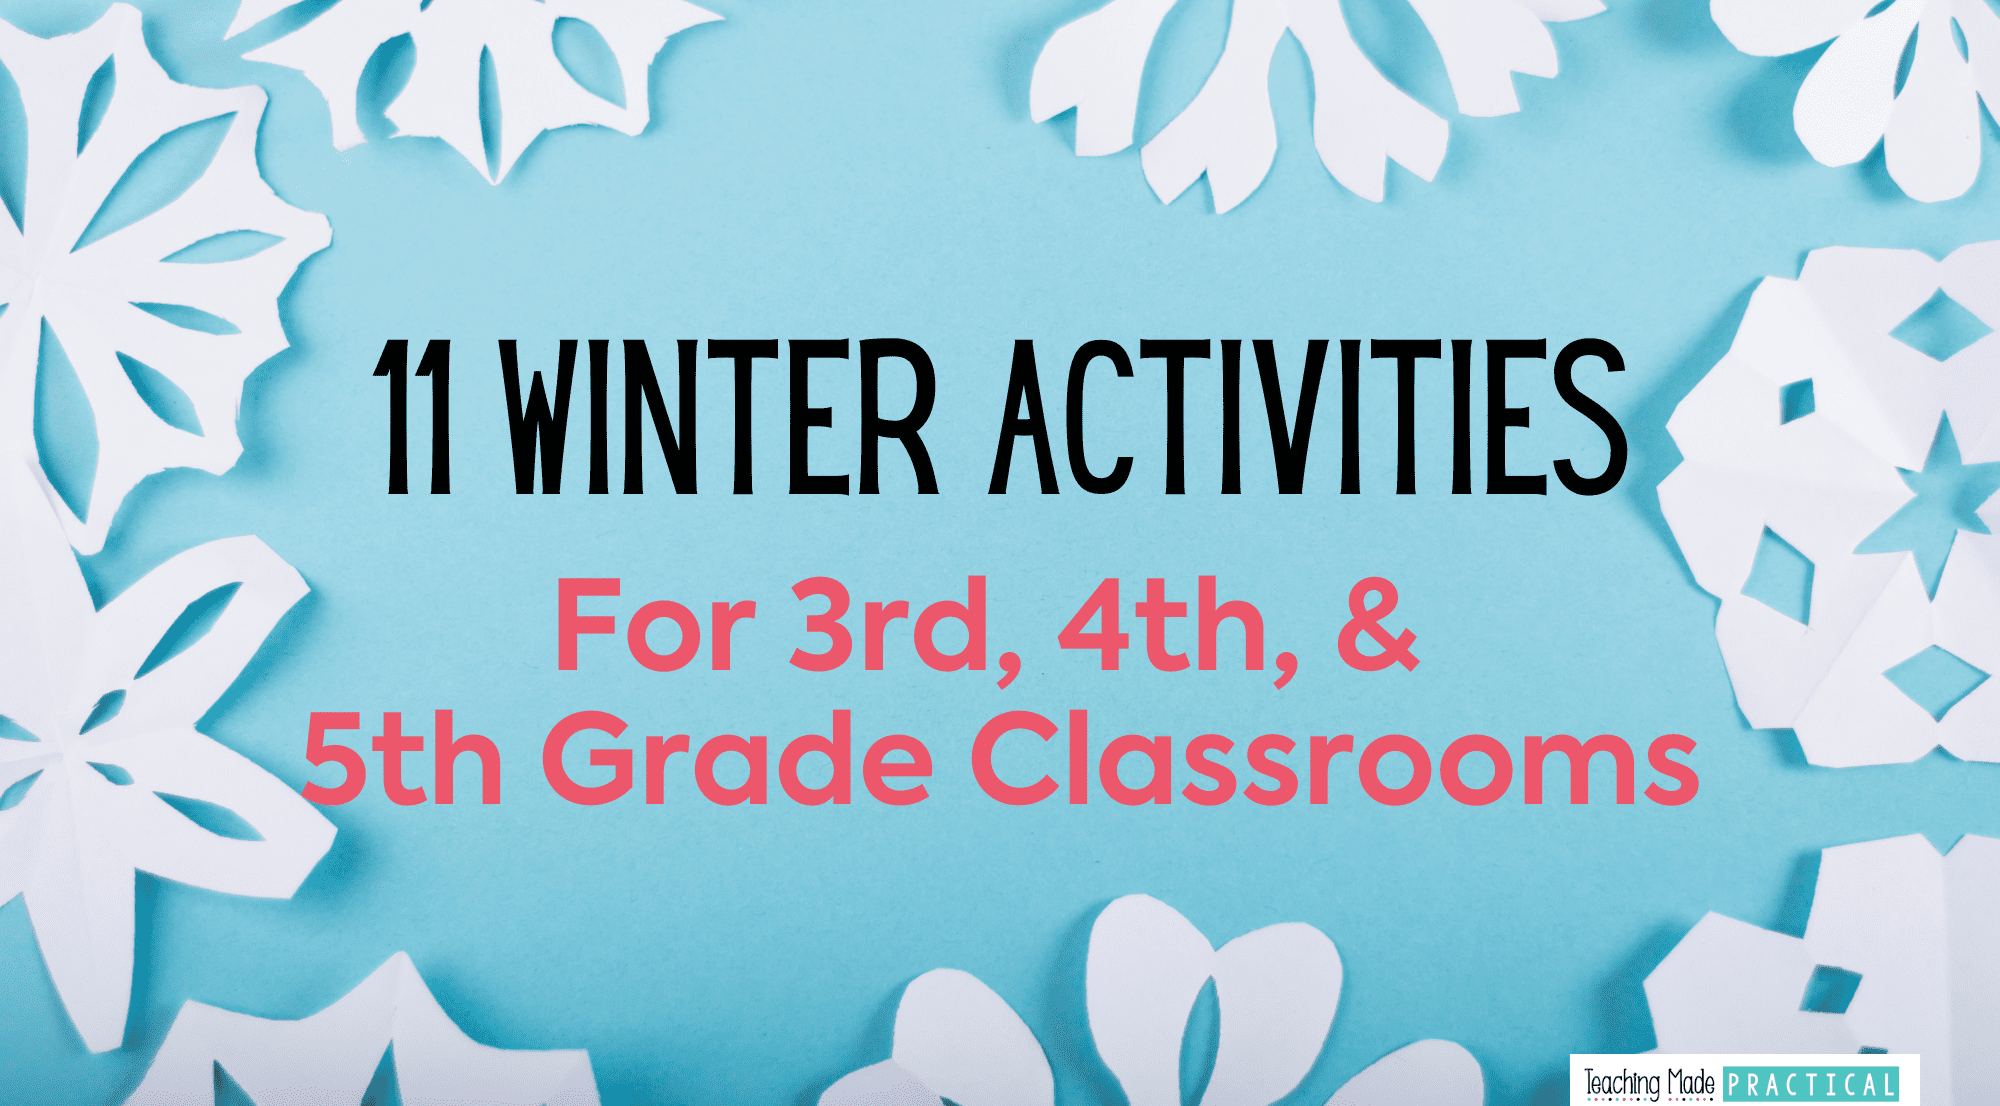 11 Winter Activity Ideas for 3rd, 4th, and 5th Grade Students and Classrooms